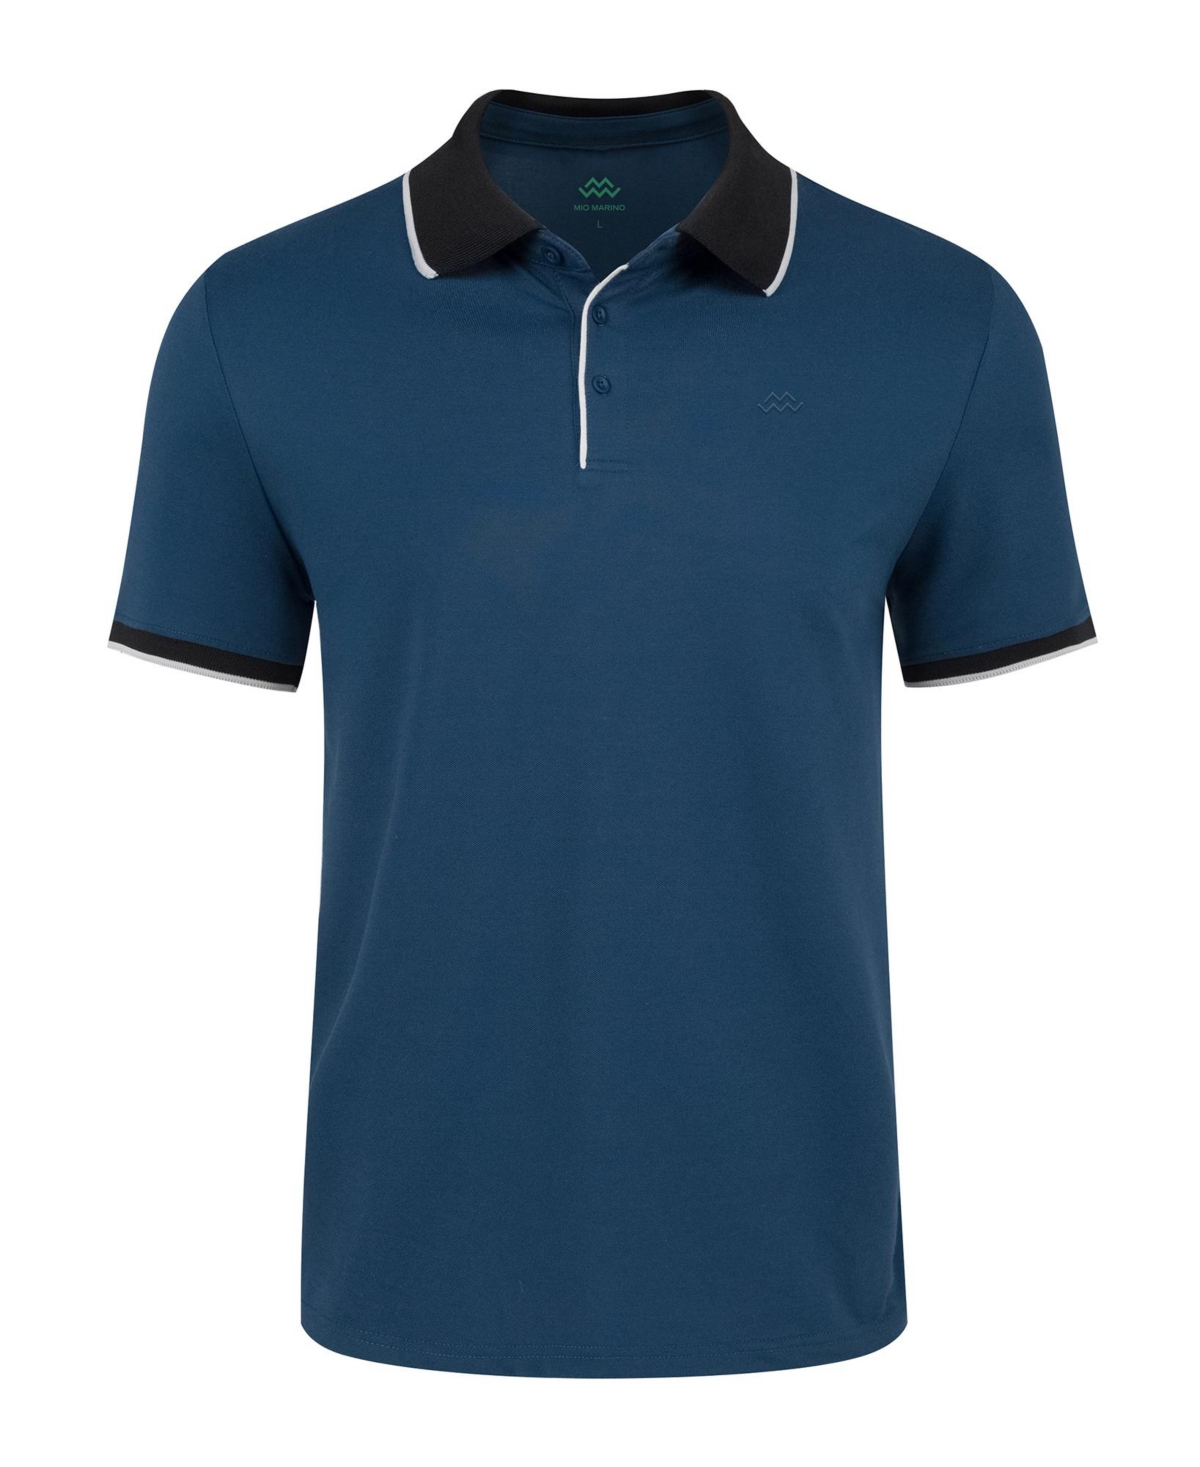 Big & Tall Classic-Fit Cotton-Blend Pique Polo Shirt with Contrast Collar - Denim blue